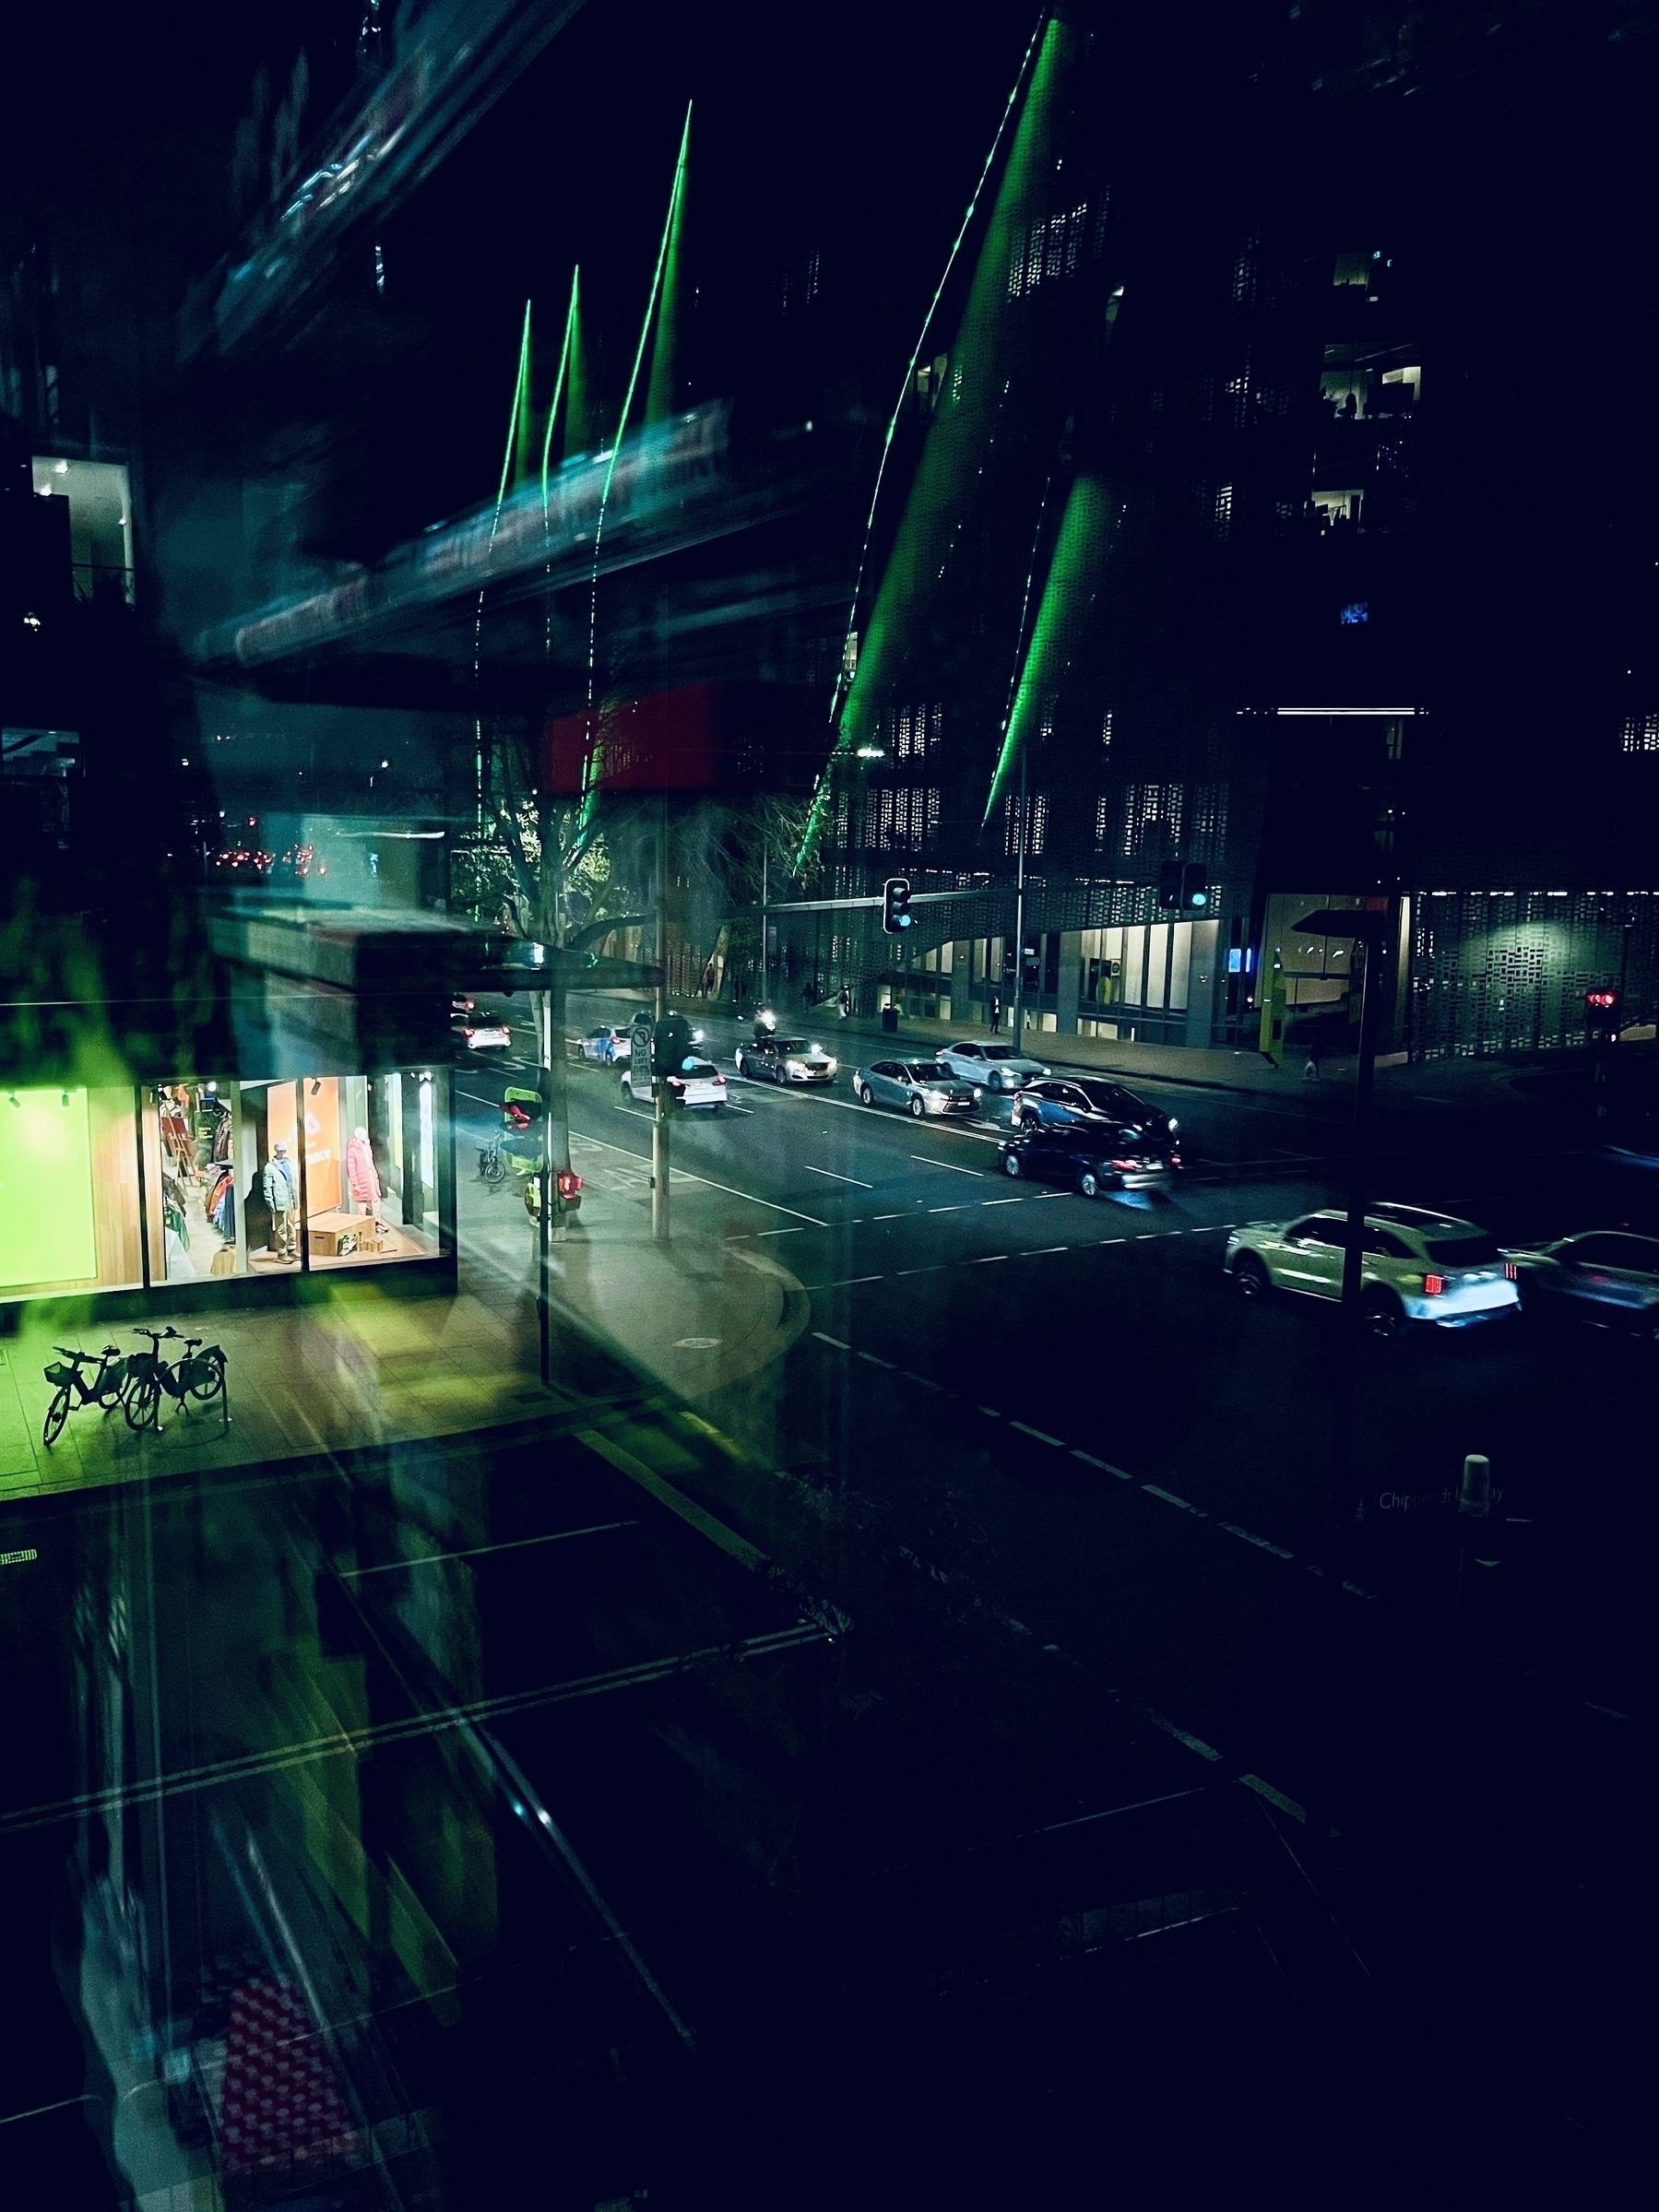 Overlooking a city intersection with green building lights and glass reflections